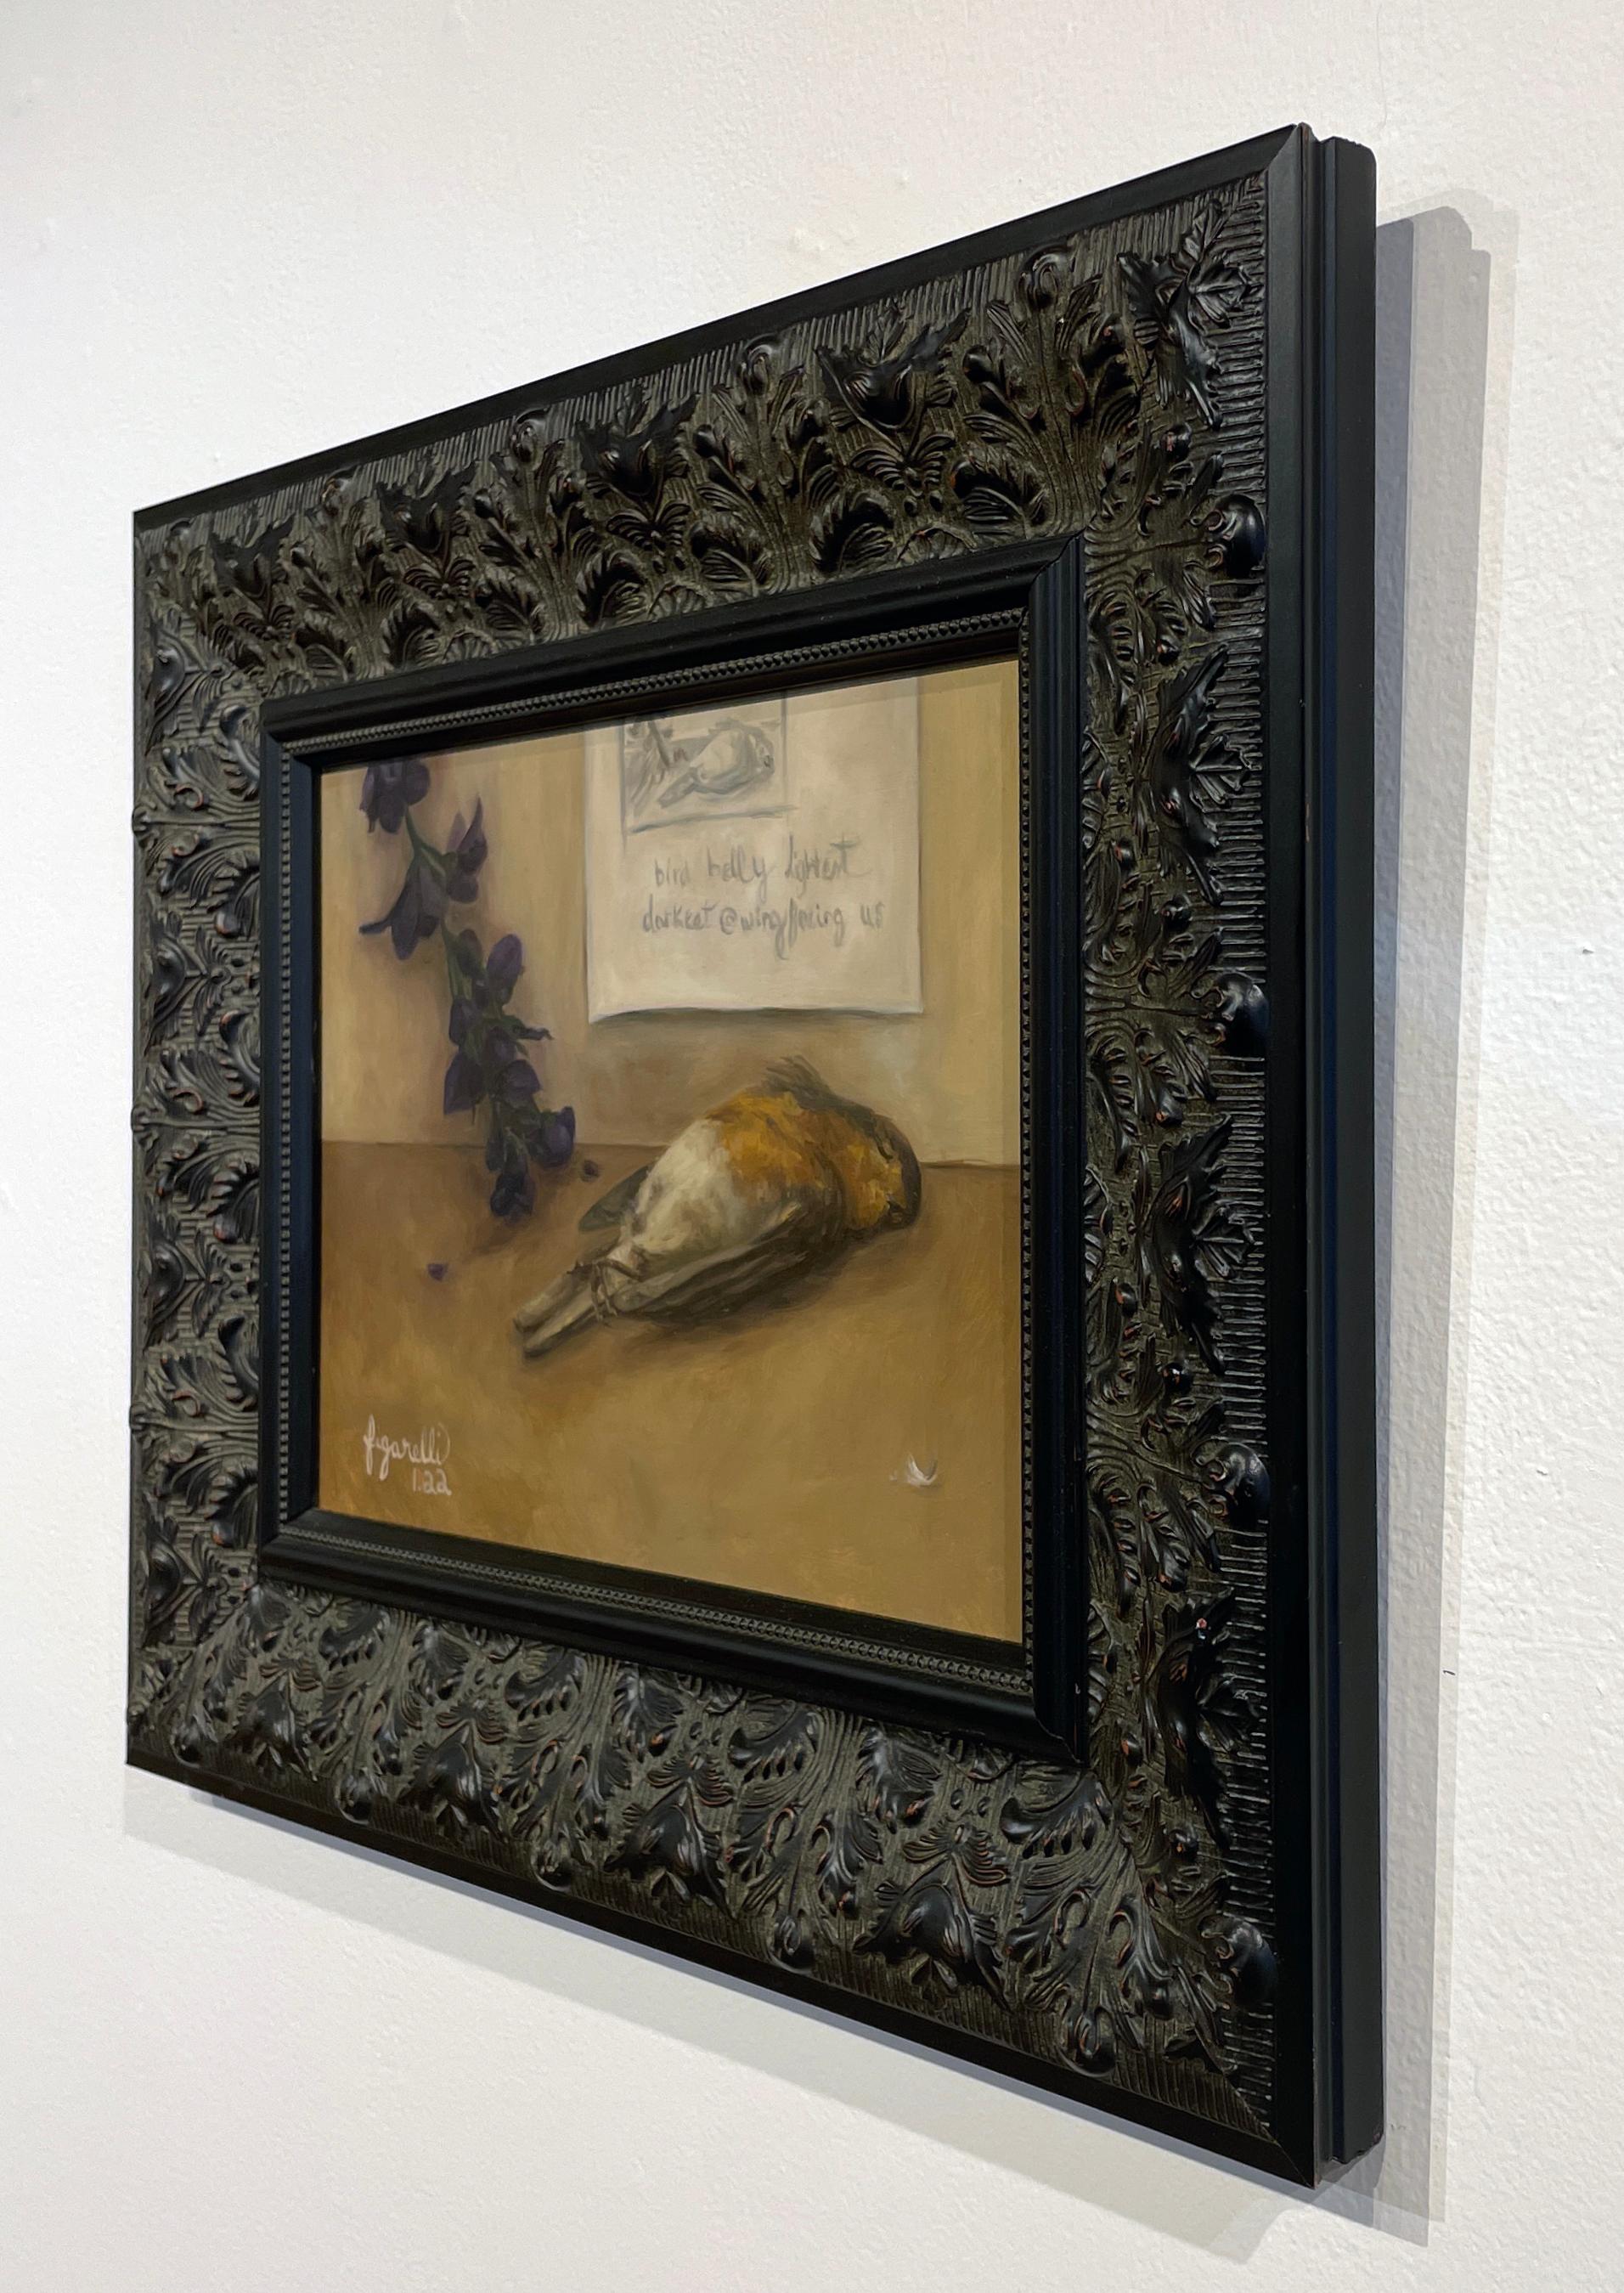 Broken Window - Still Life with Flower, Dead Bird and Note, Oil on Panel, Framed - Contemporary Painting by Tina Figarelli